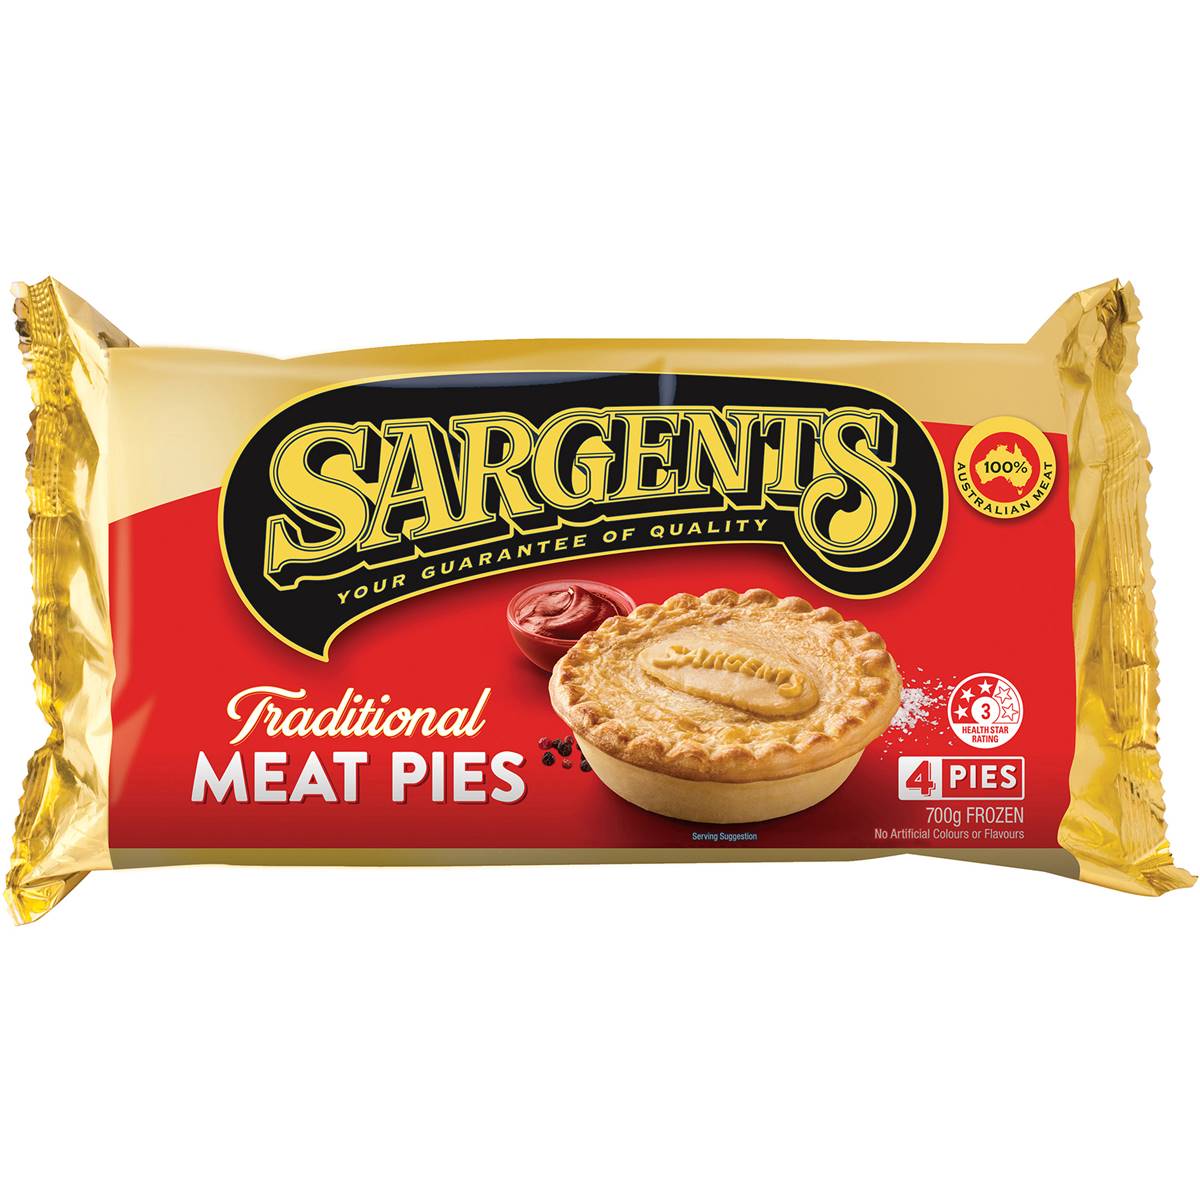 Calories in Sargents Pies Meat